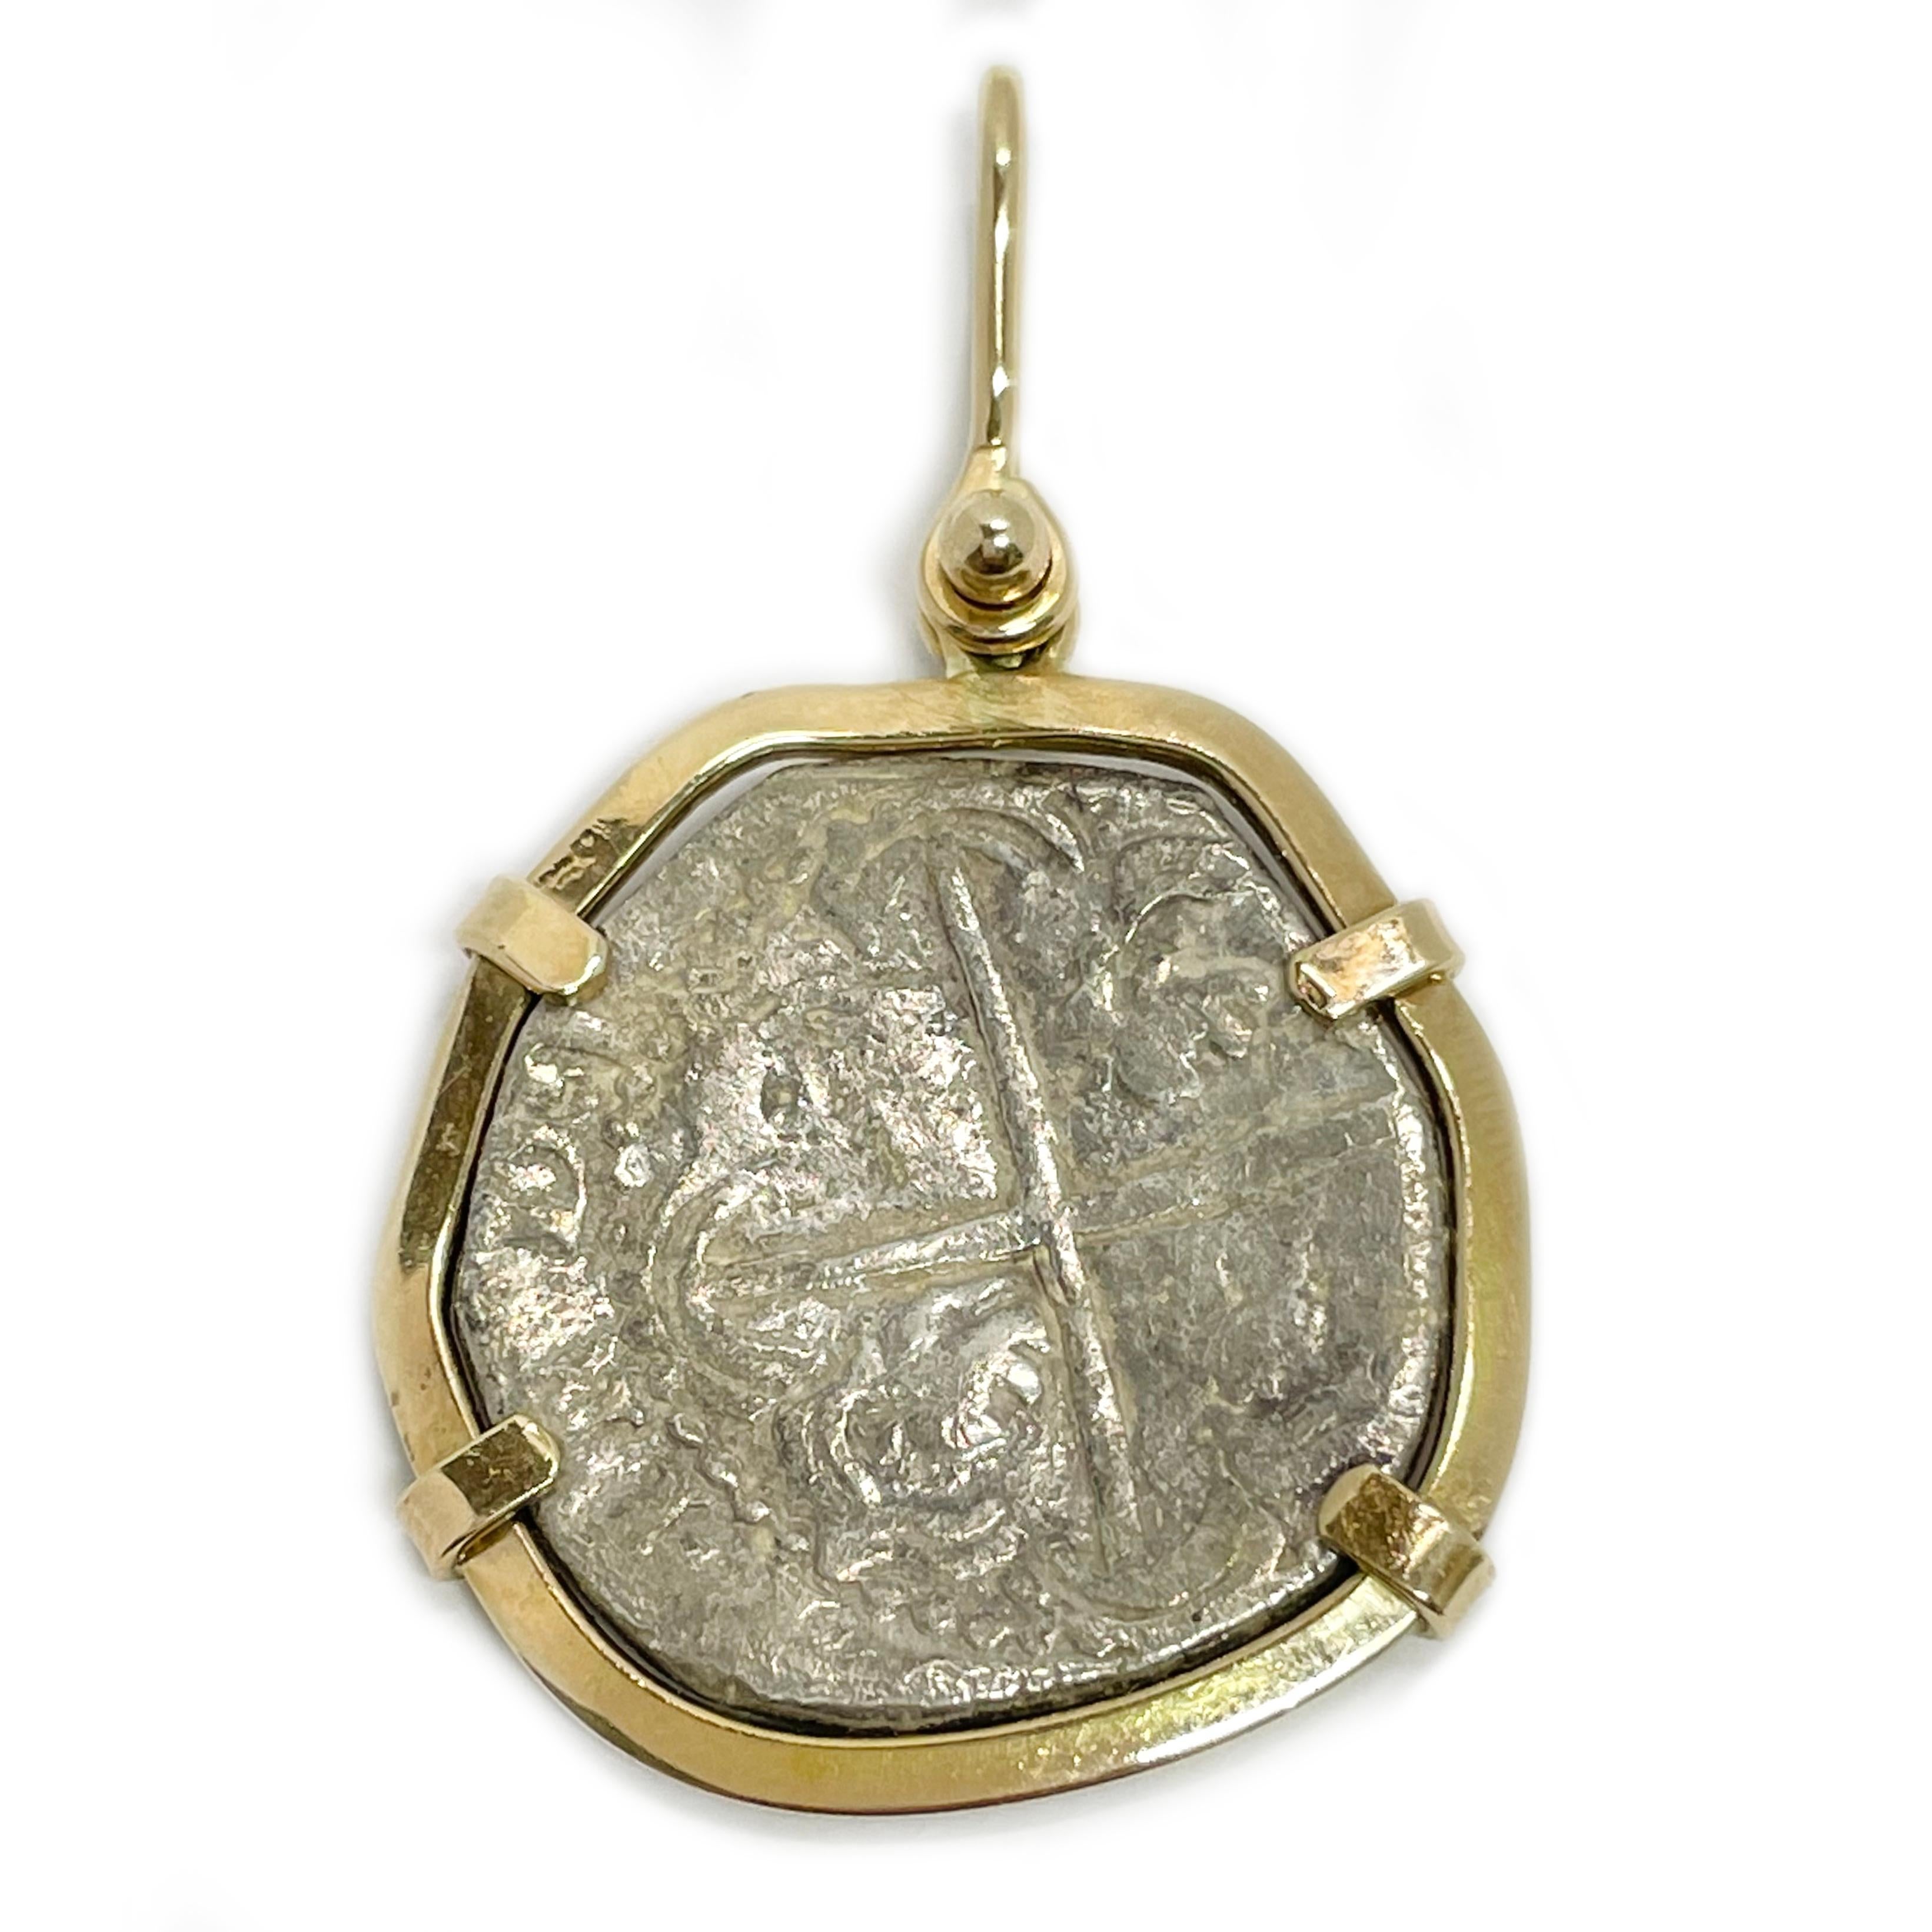 Atocha Two Tone Coin Pendant. The pendant measures 28mm x 43mm (including bail). The coin shows quite a bit of wear, the markings on the coin are not readable and there are no markings on the bezel or coin. The bezel tests as 14 karat yellow gold